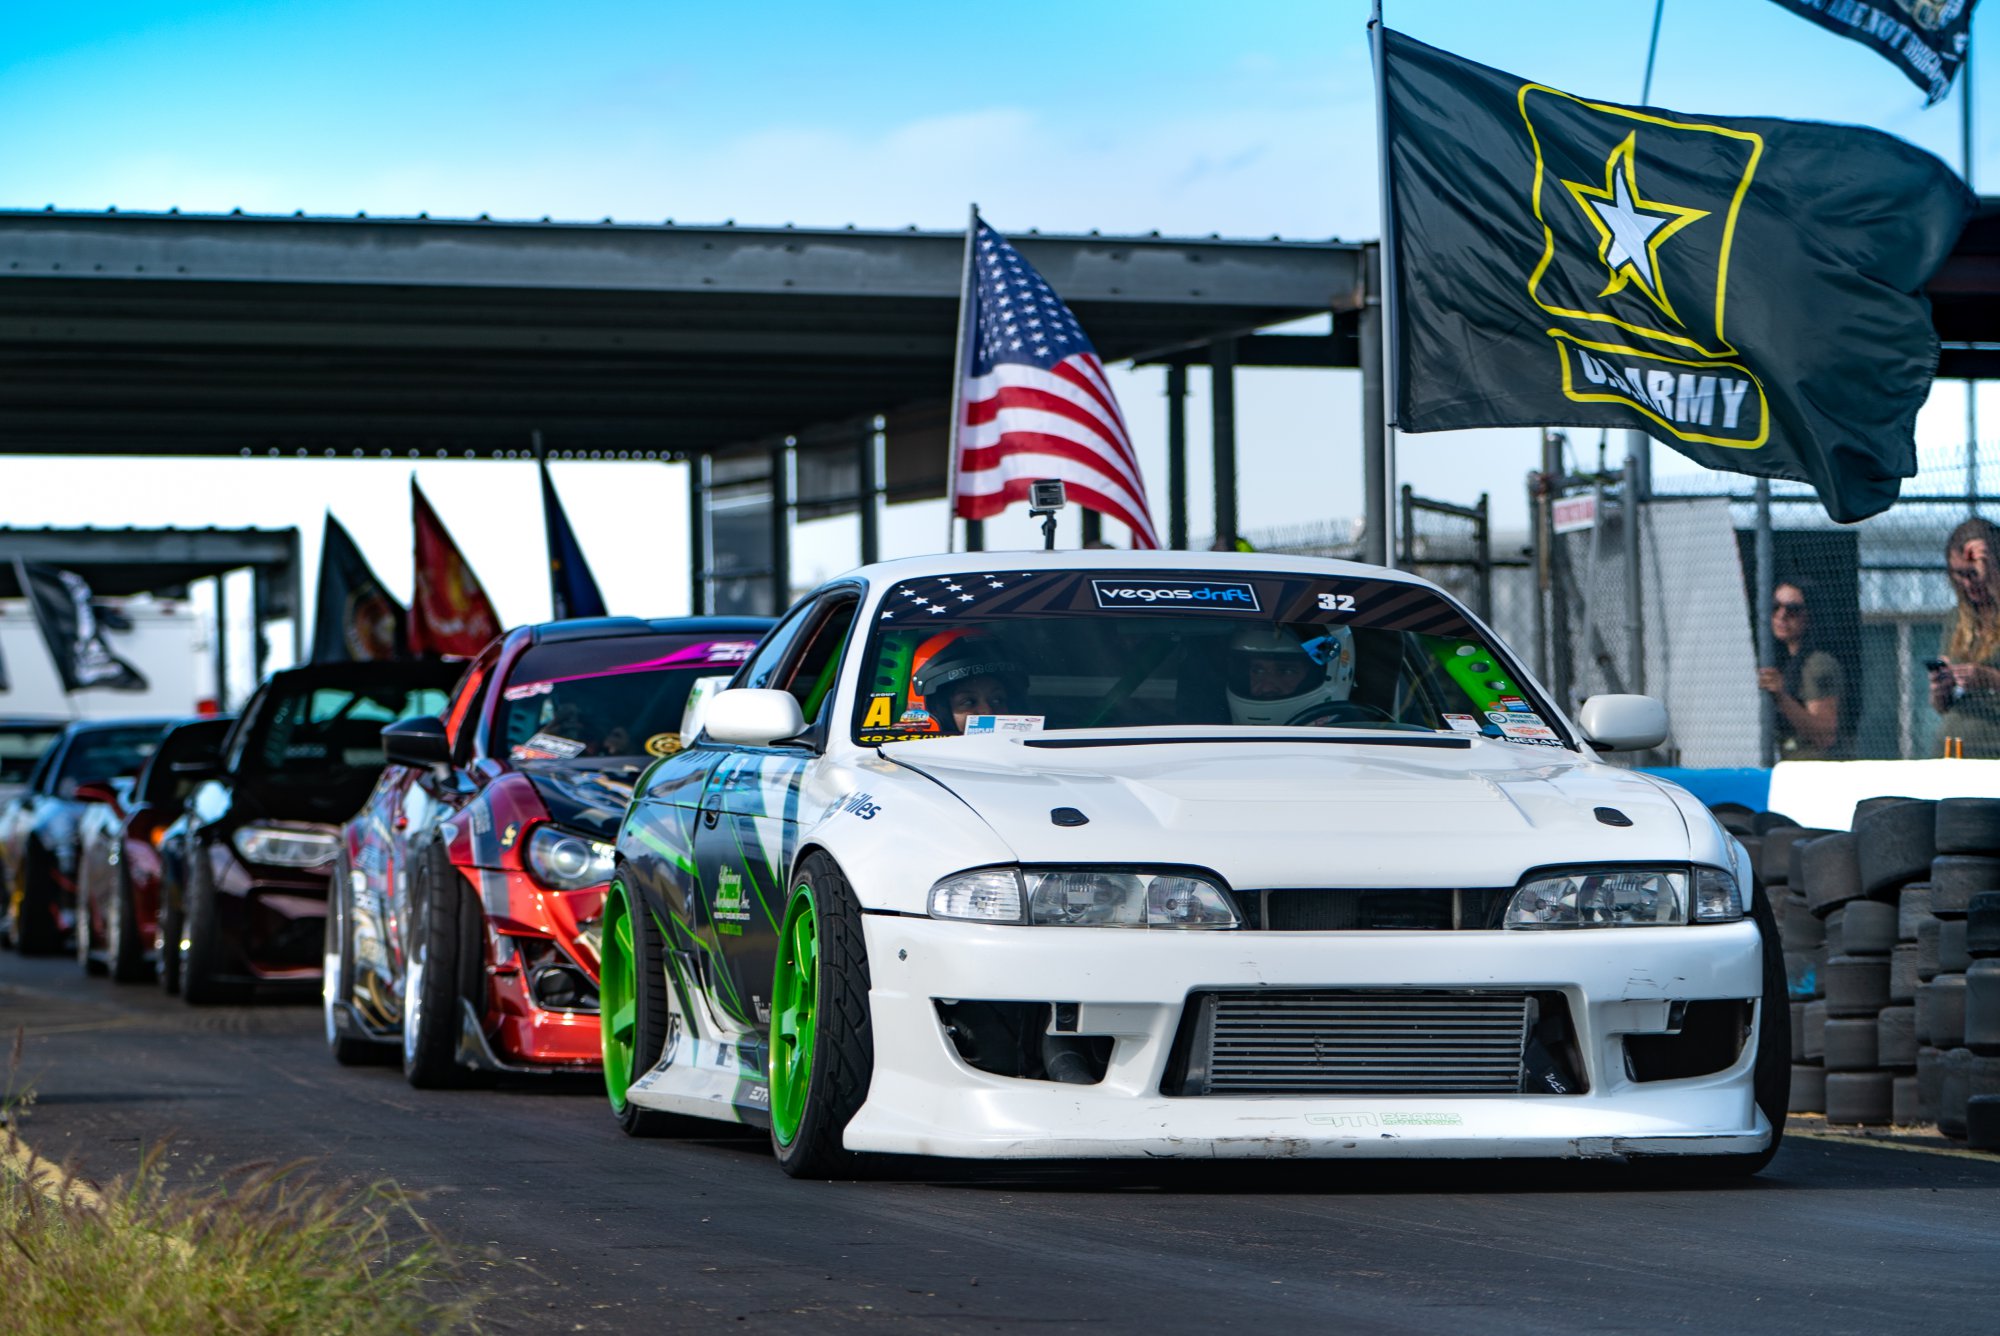 Drift drivers give veterans a healthy dose of adrenaline with ride alongs on track | Rebecca Nguyen photos